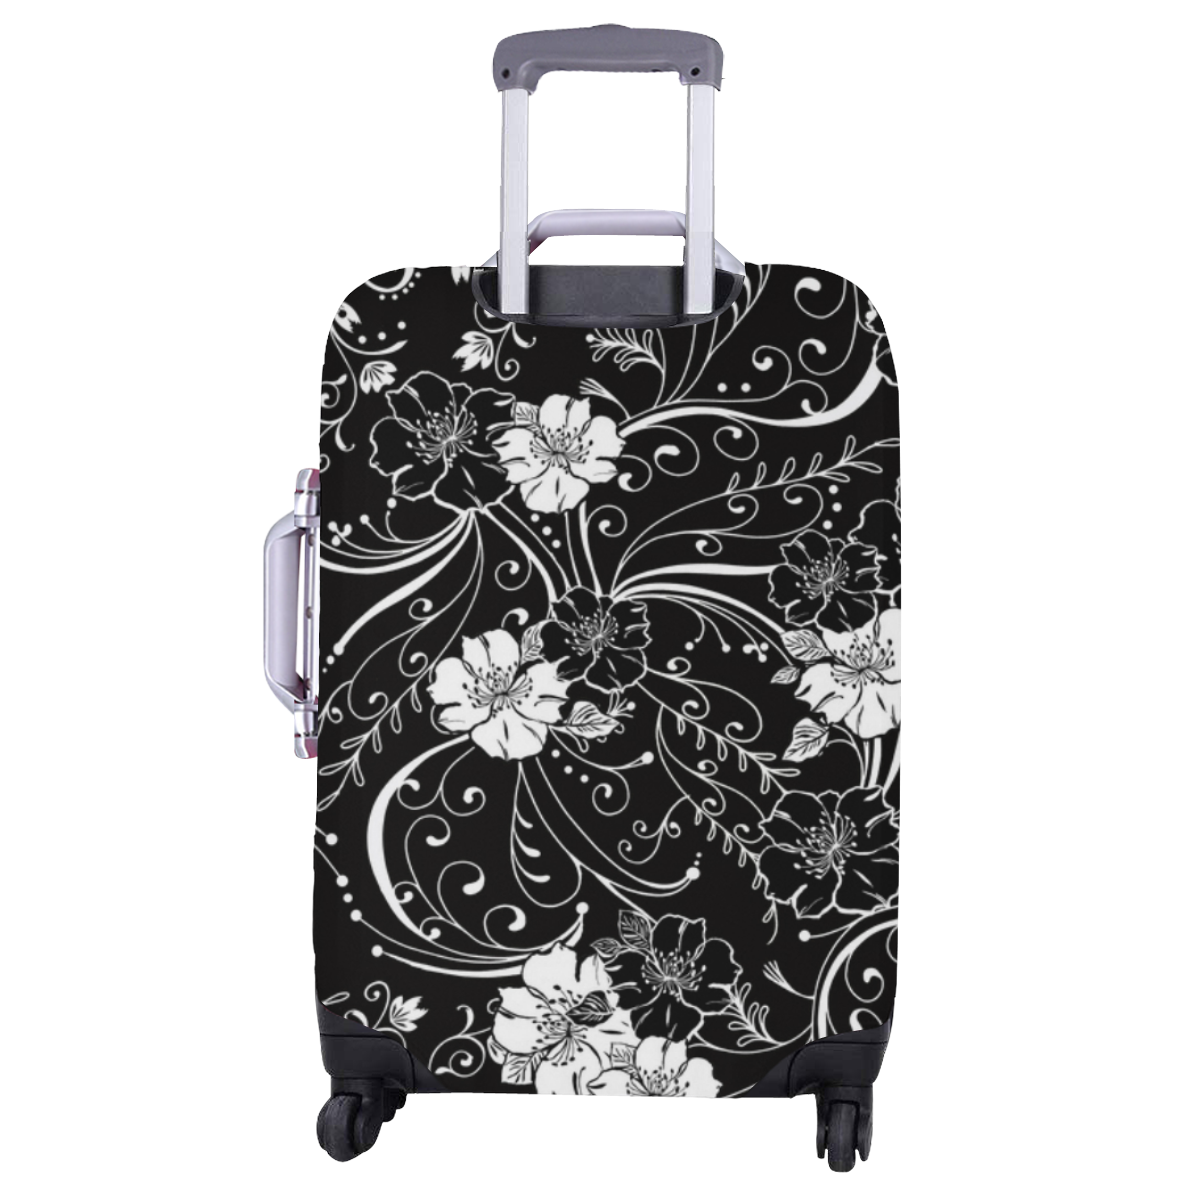 Luggage Cover Black White Flower Luggage Cover/Large 26"-28"